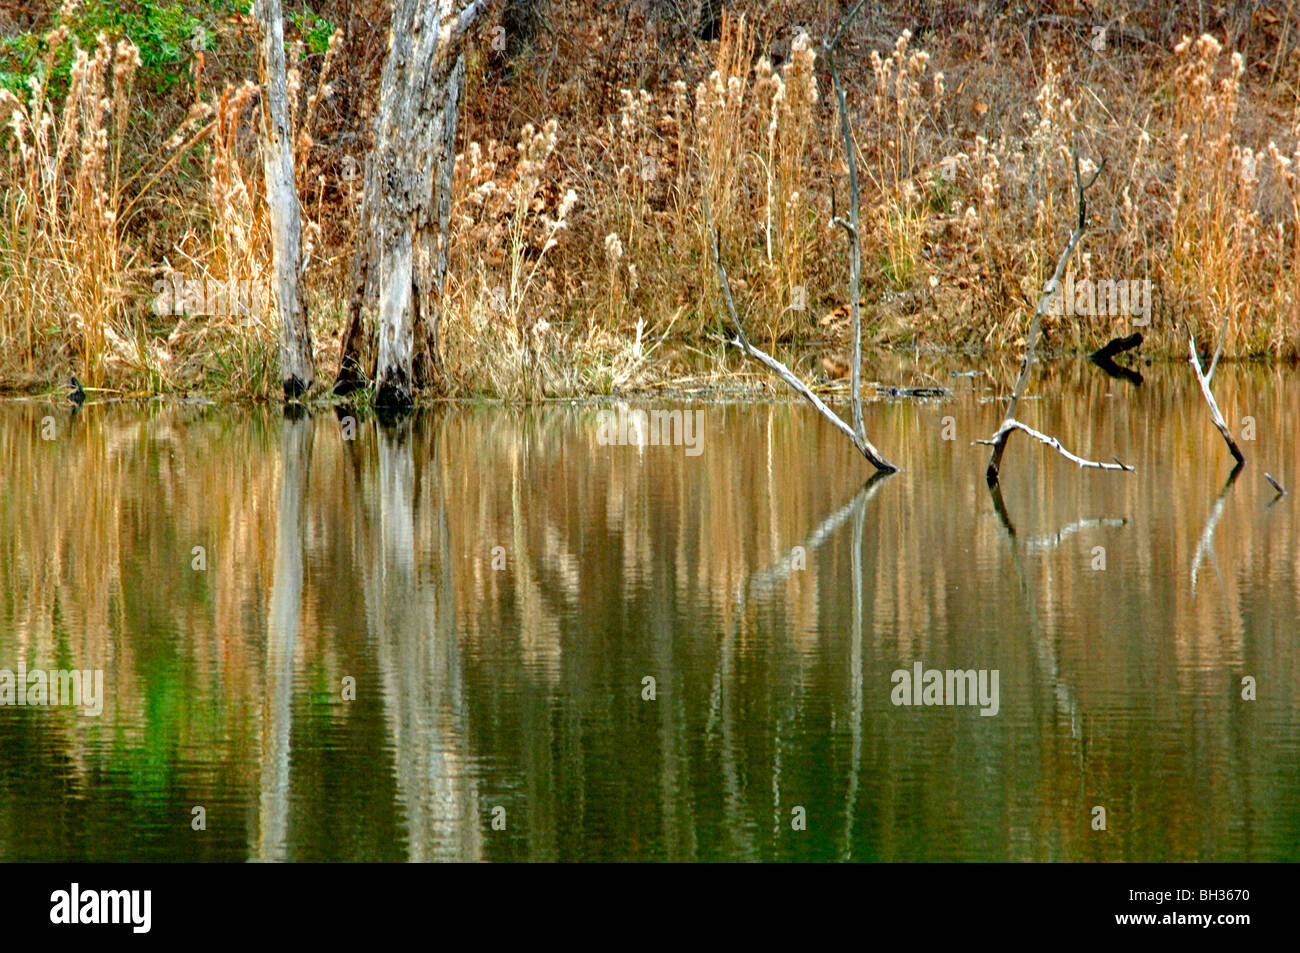 Detail shots of natural beauty, reflections and mother nature's artistic creations taken on a wildlife management area of Okla. Stock Photo